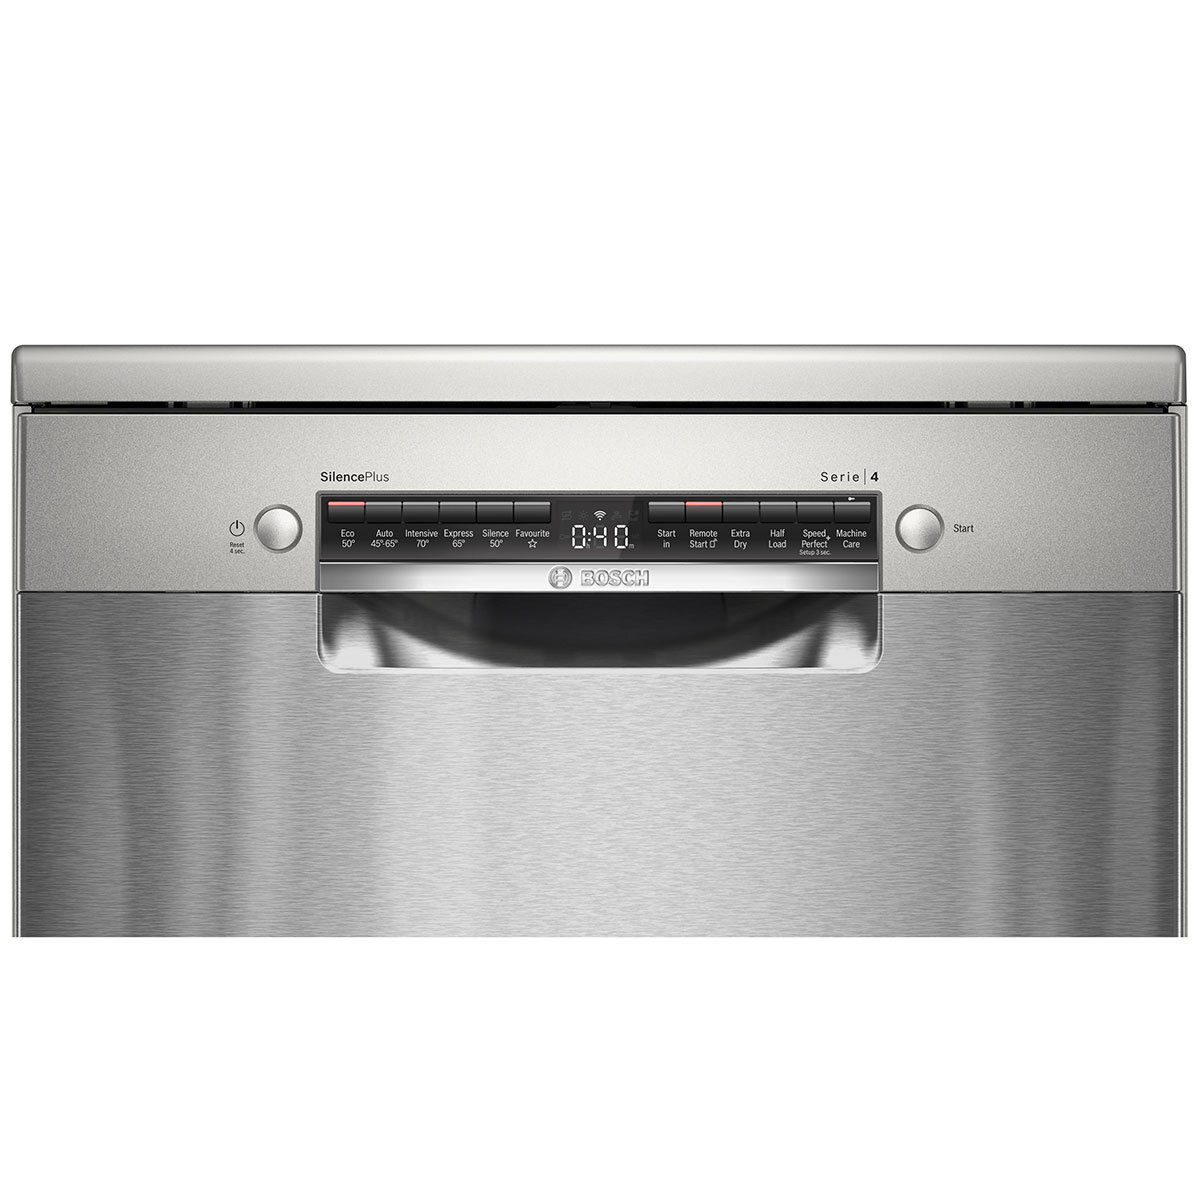 Bosch SMS4HMI00G Series 4 Freestanding Dishwasher, D Rated in Inox